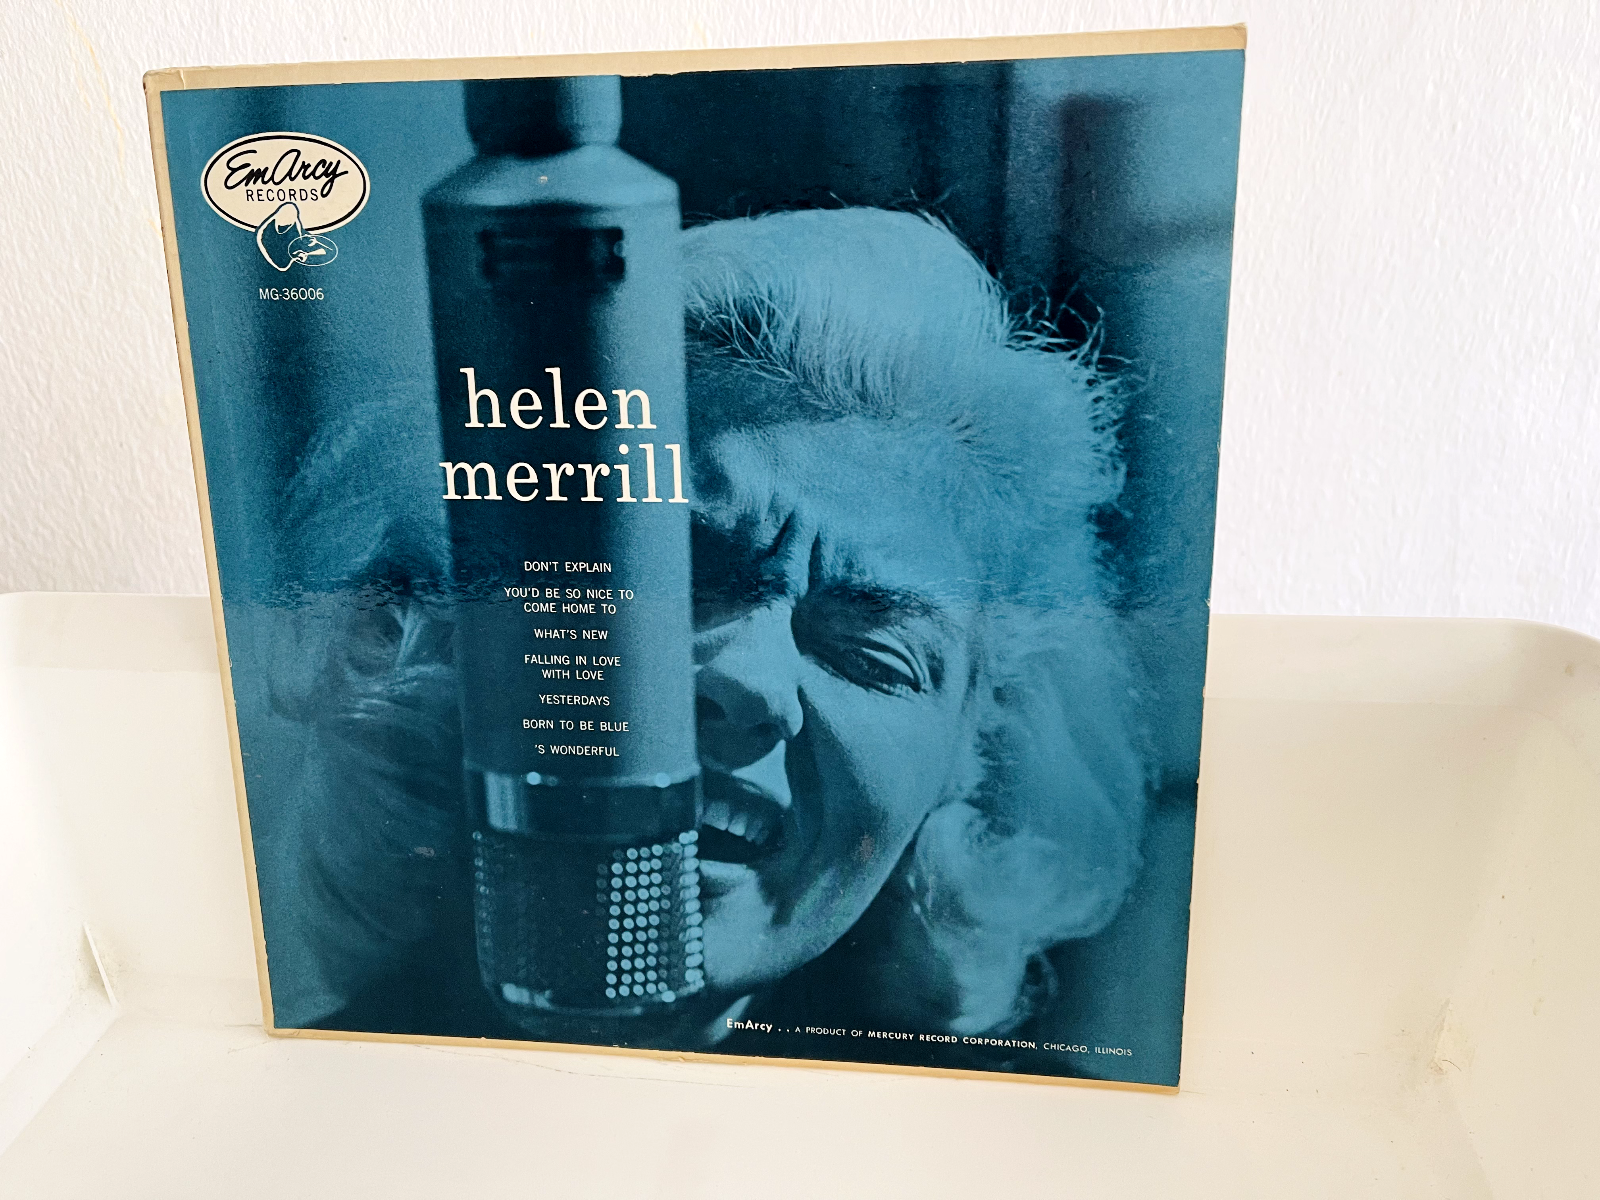 Pic 2 HELEN MERRILL - SAME - EMARCY MG 36006 - MONO - BLUE BACK  COVER - 1954 -  TOP